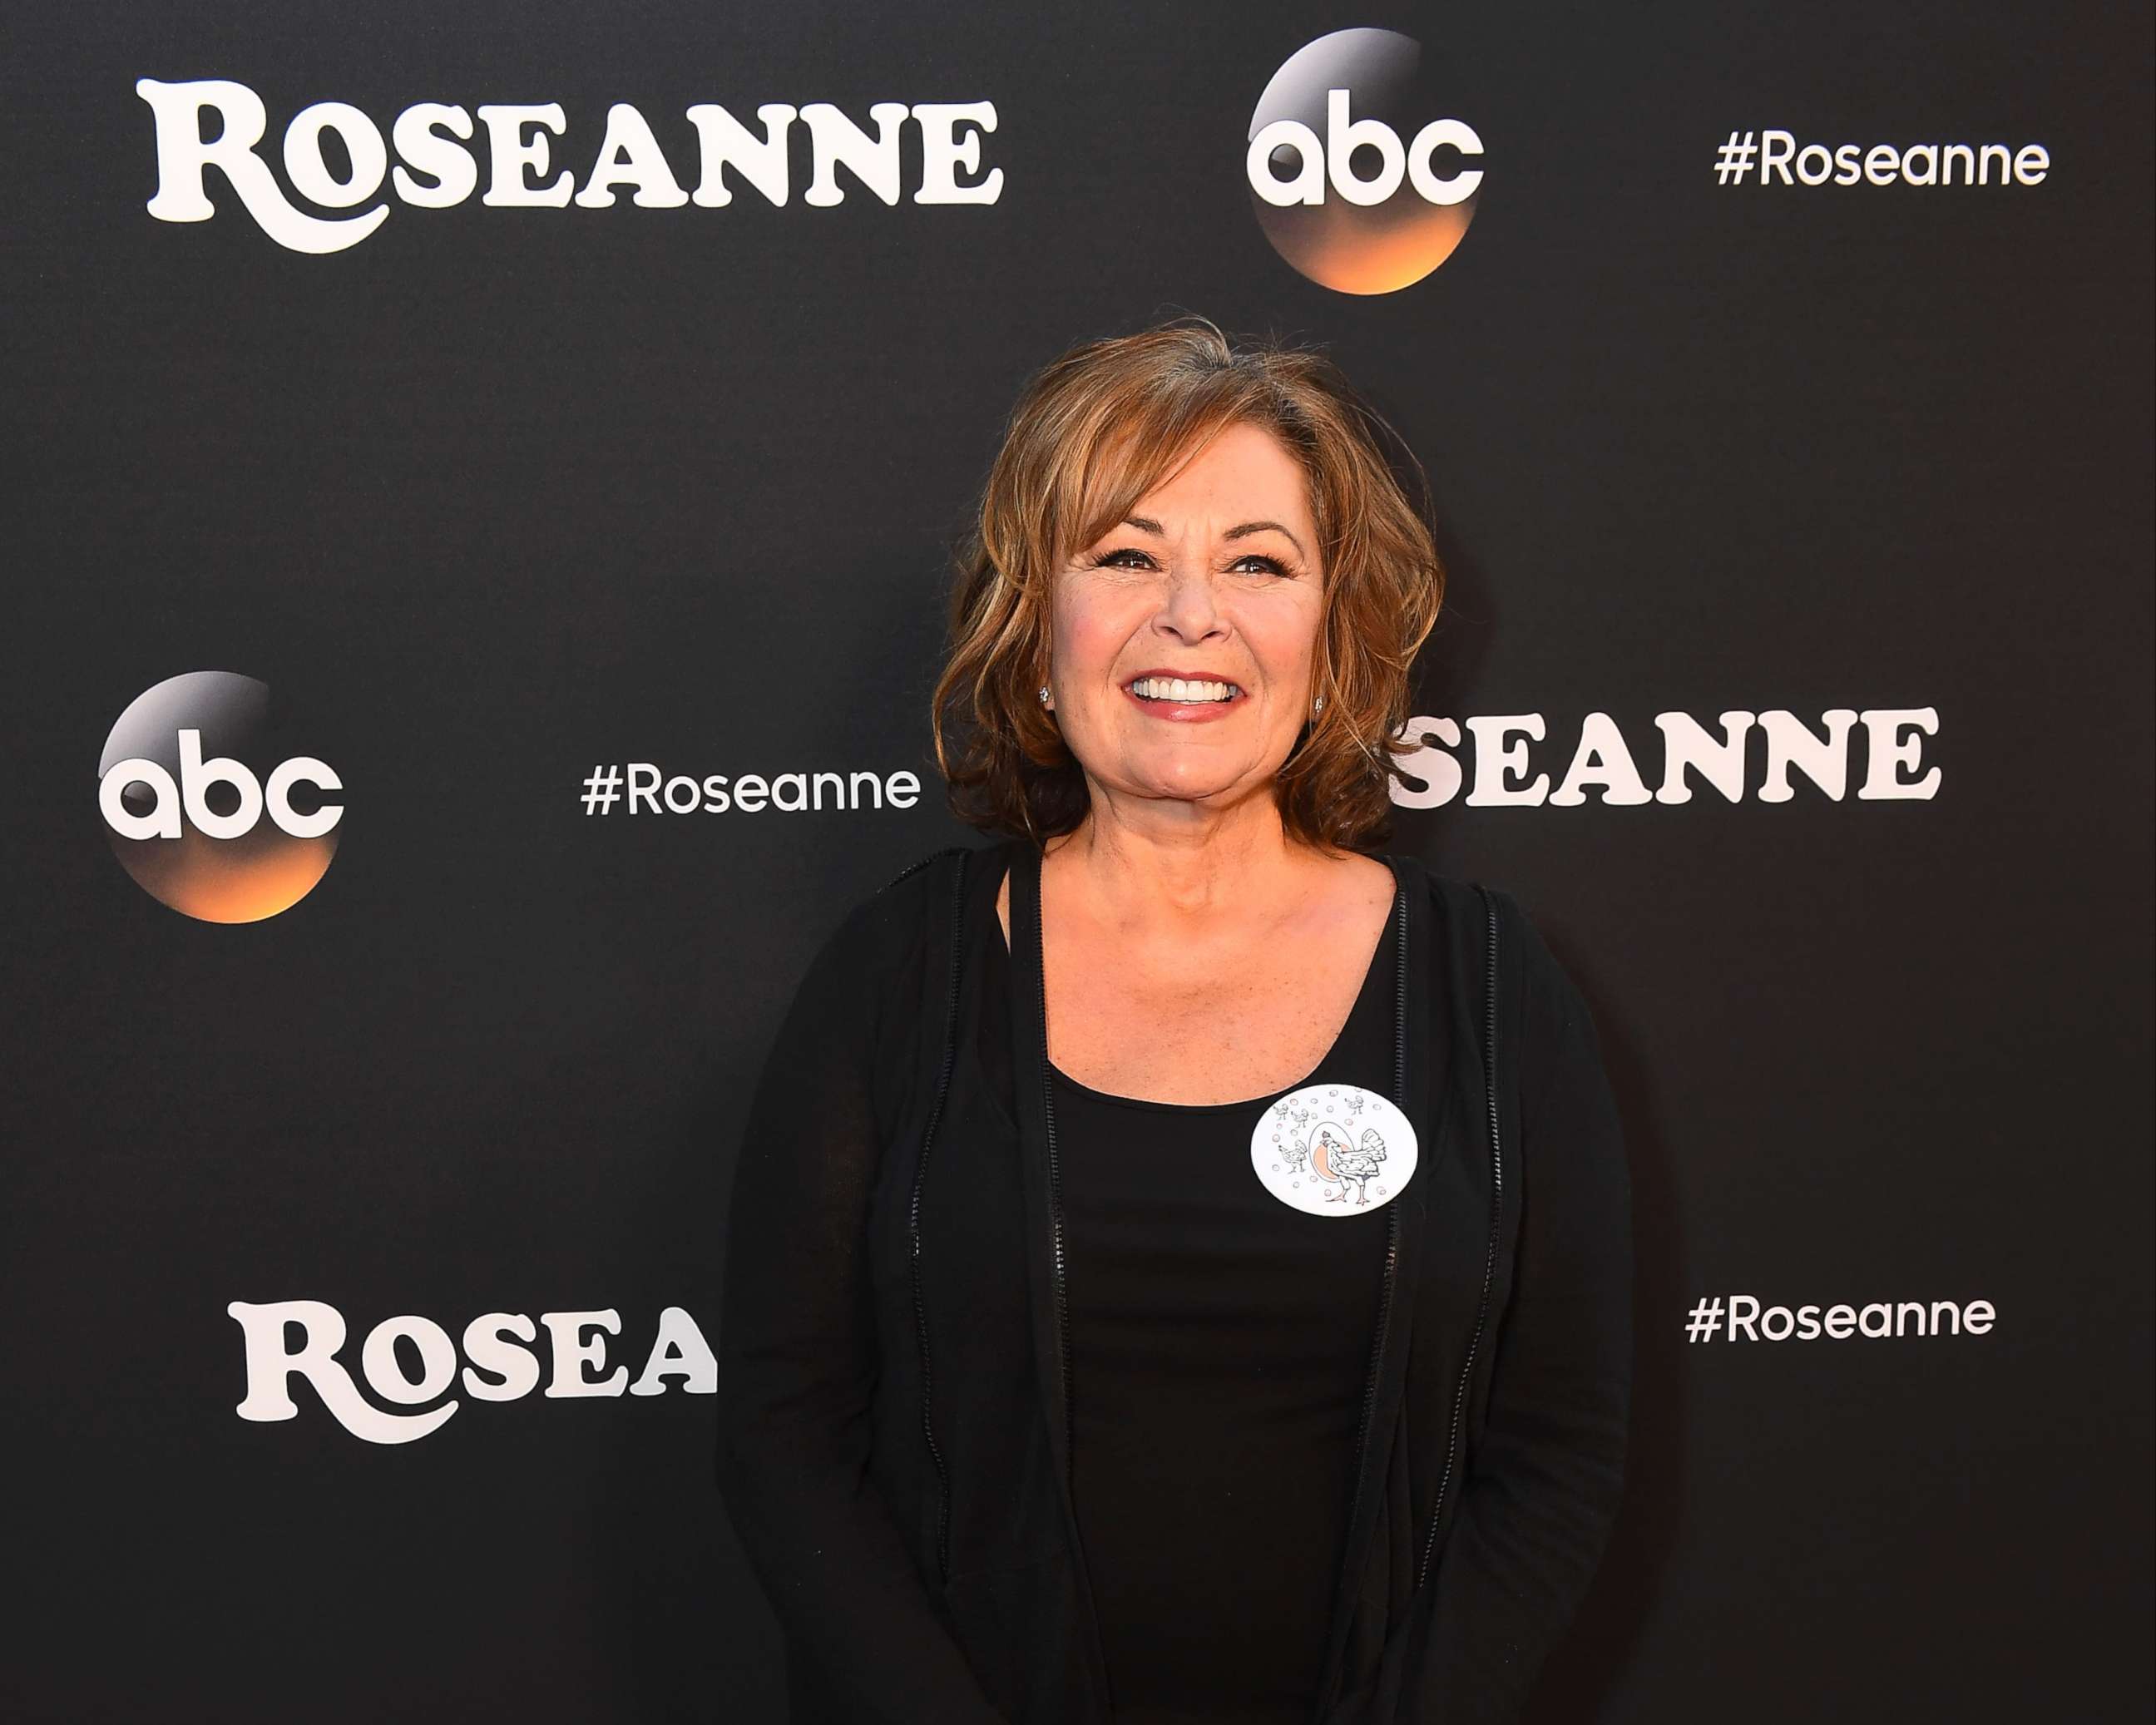 PHOTO: Roseanne Barr is seen at the premiere of "Roseanne."